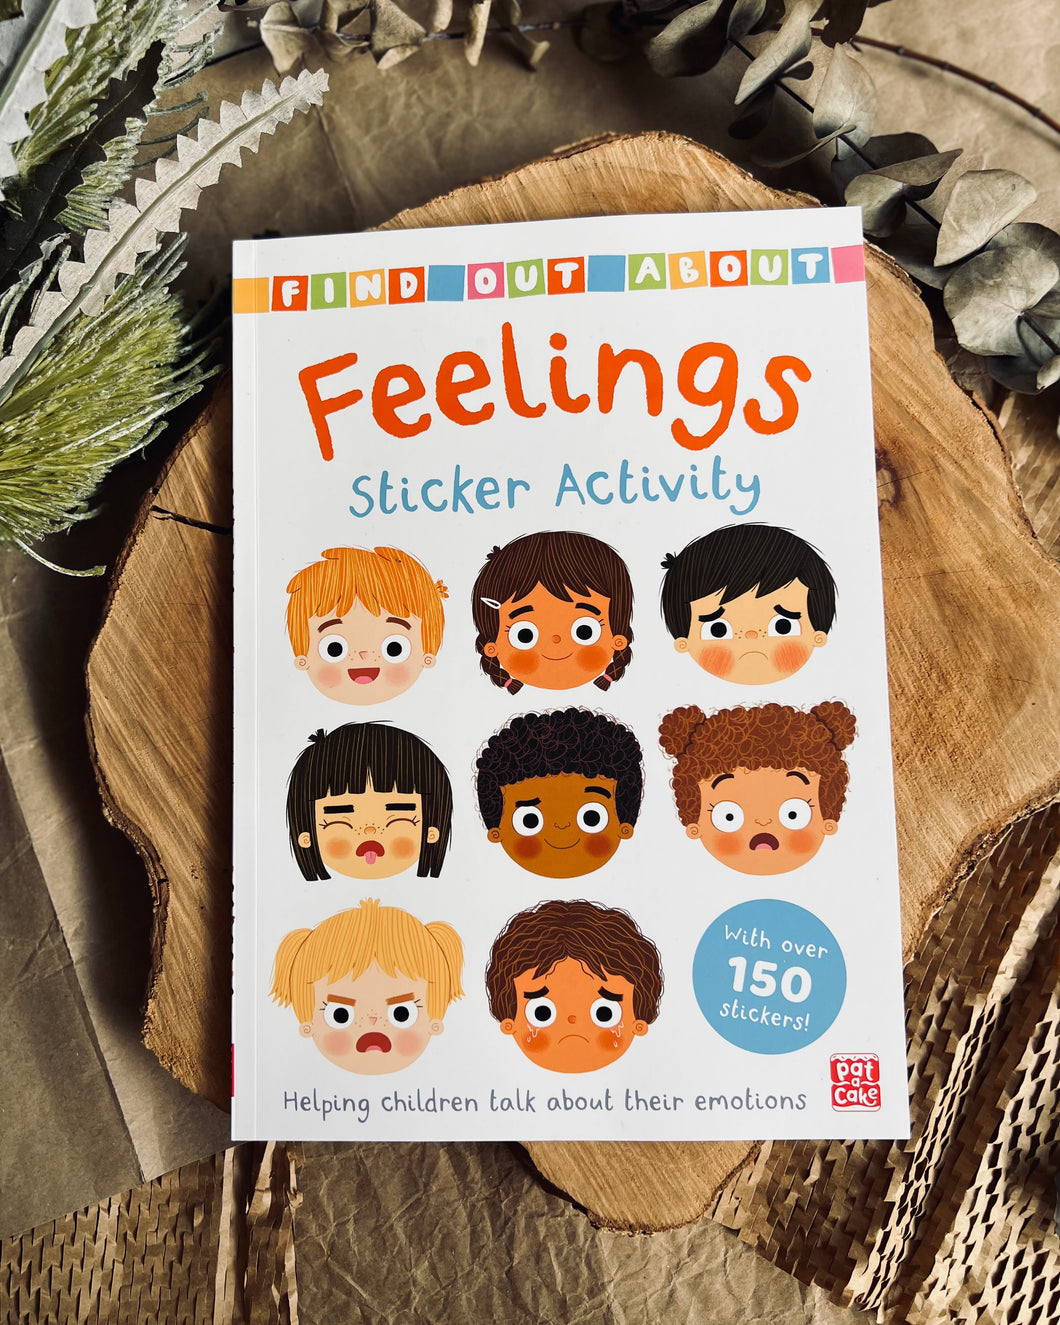 Find Out About: Feelings Sticker Activity (Helping children talk about their emotions - with over 150 stickers!)